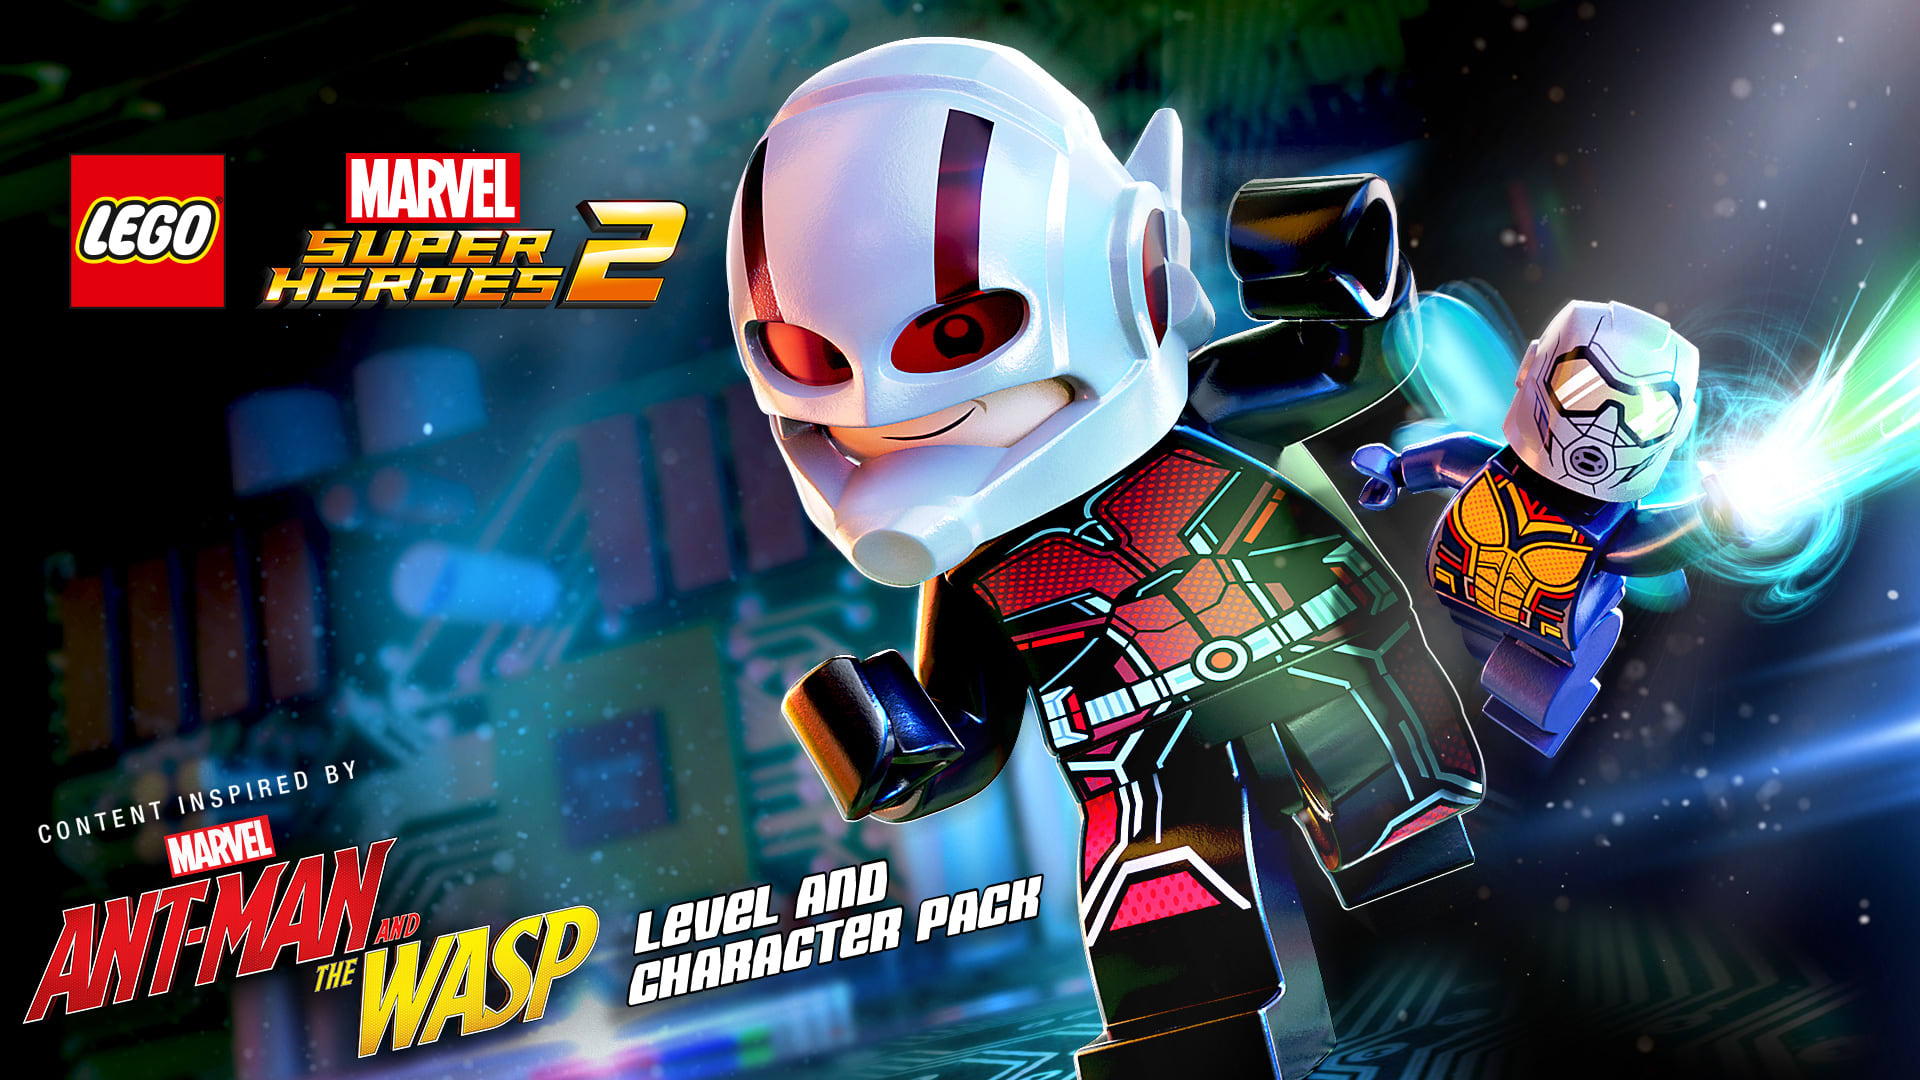 Marvel's Ant-Man and the Wasp Character and Level Pack